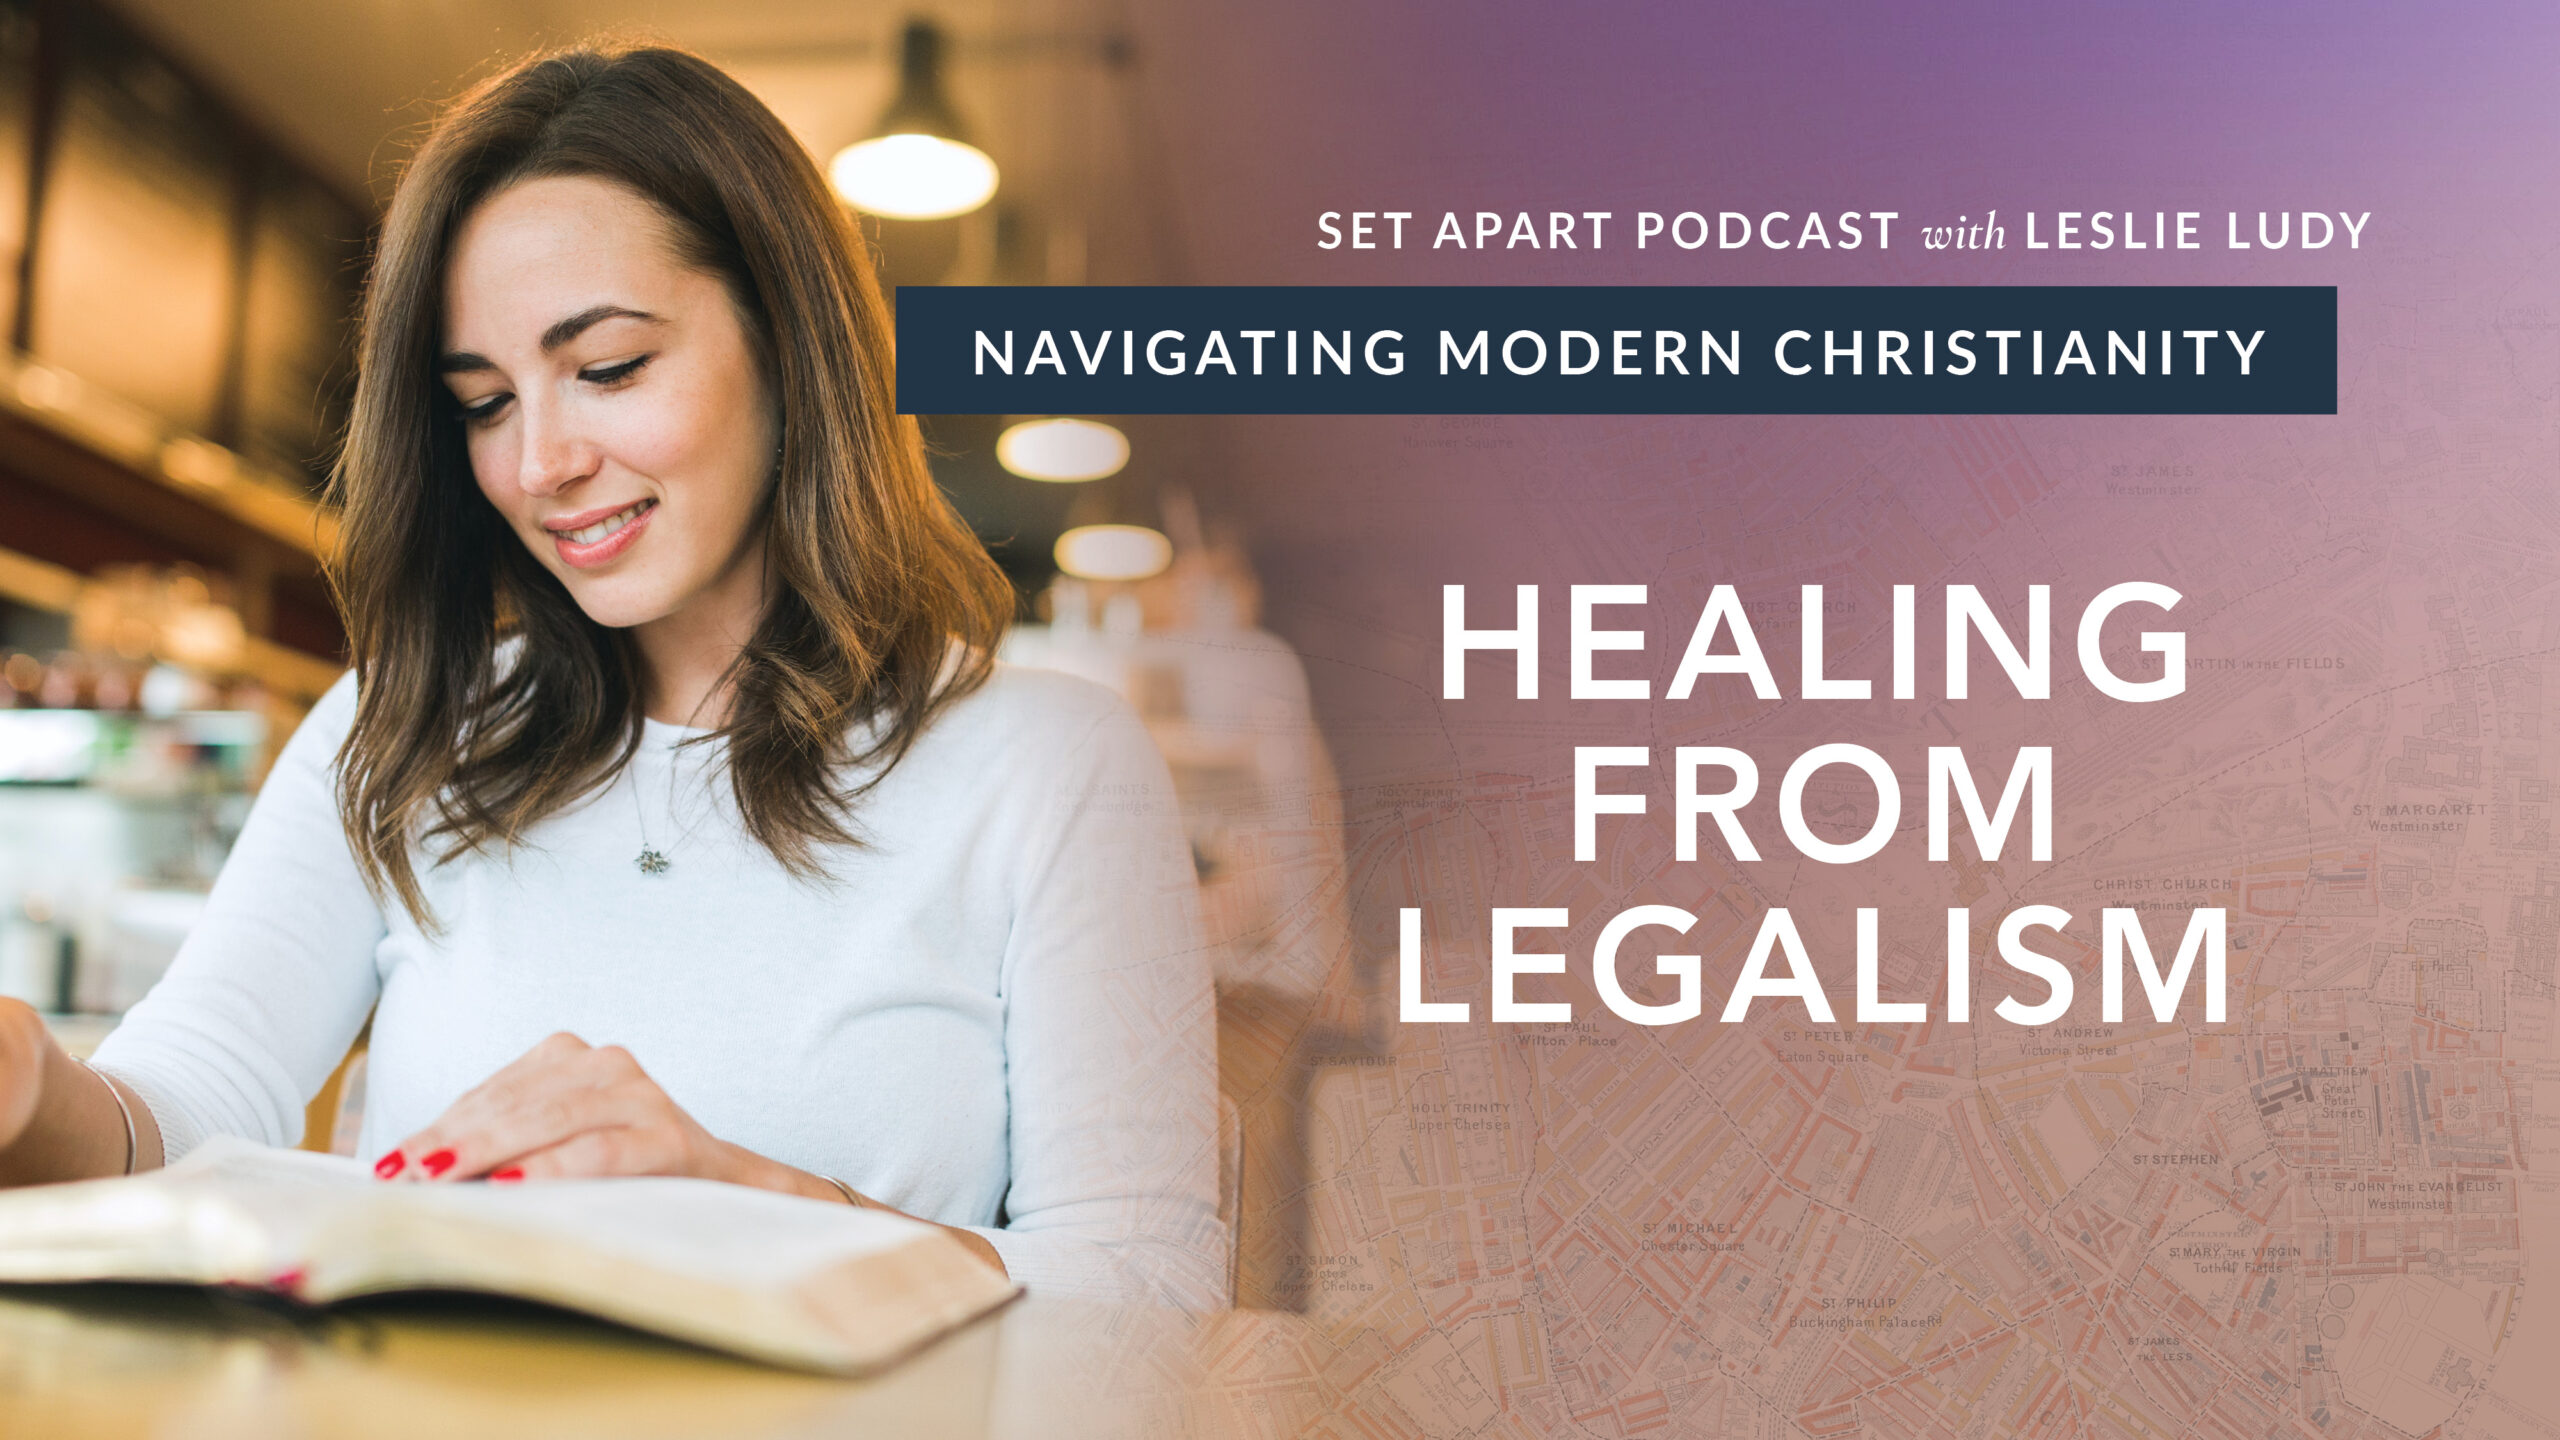 Healing from Legalism